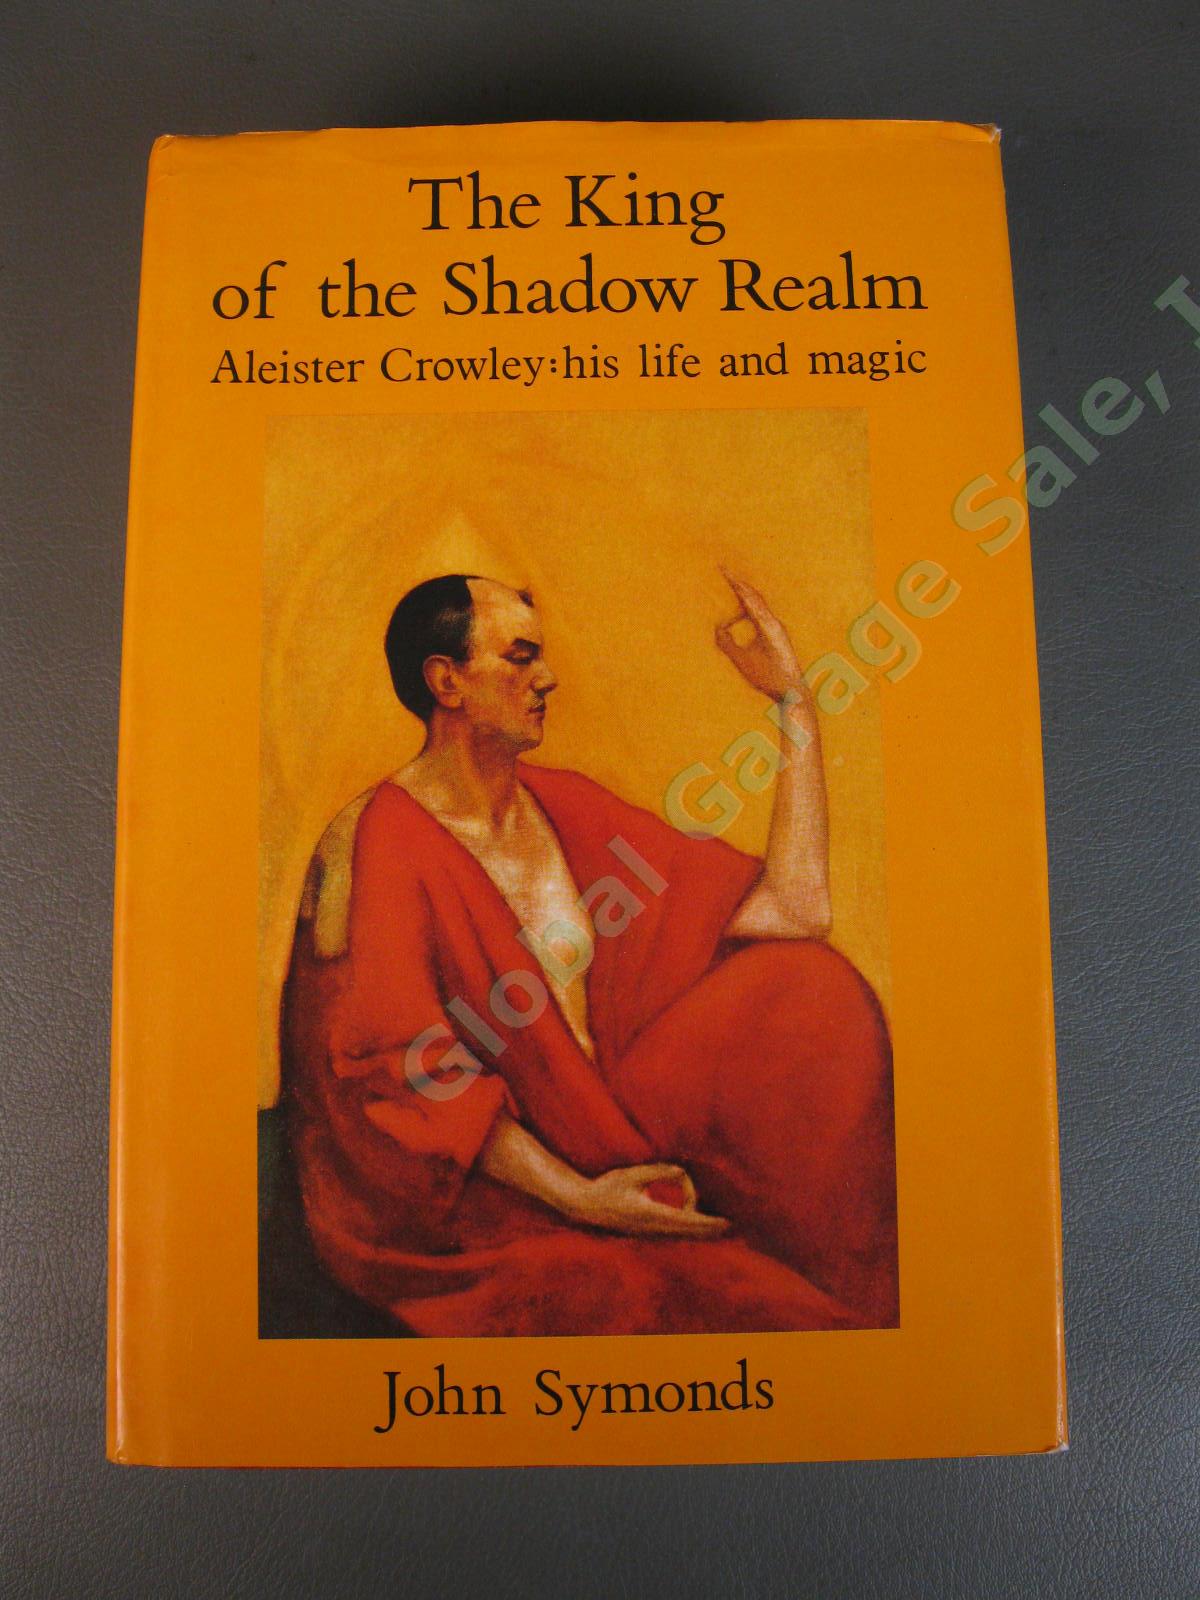 Aleister Crowley The King of the Shadow Realm John Symonds 1st Ed 1989 Occult NR